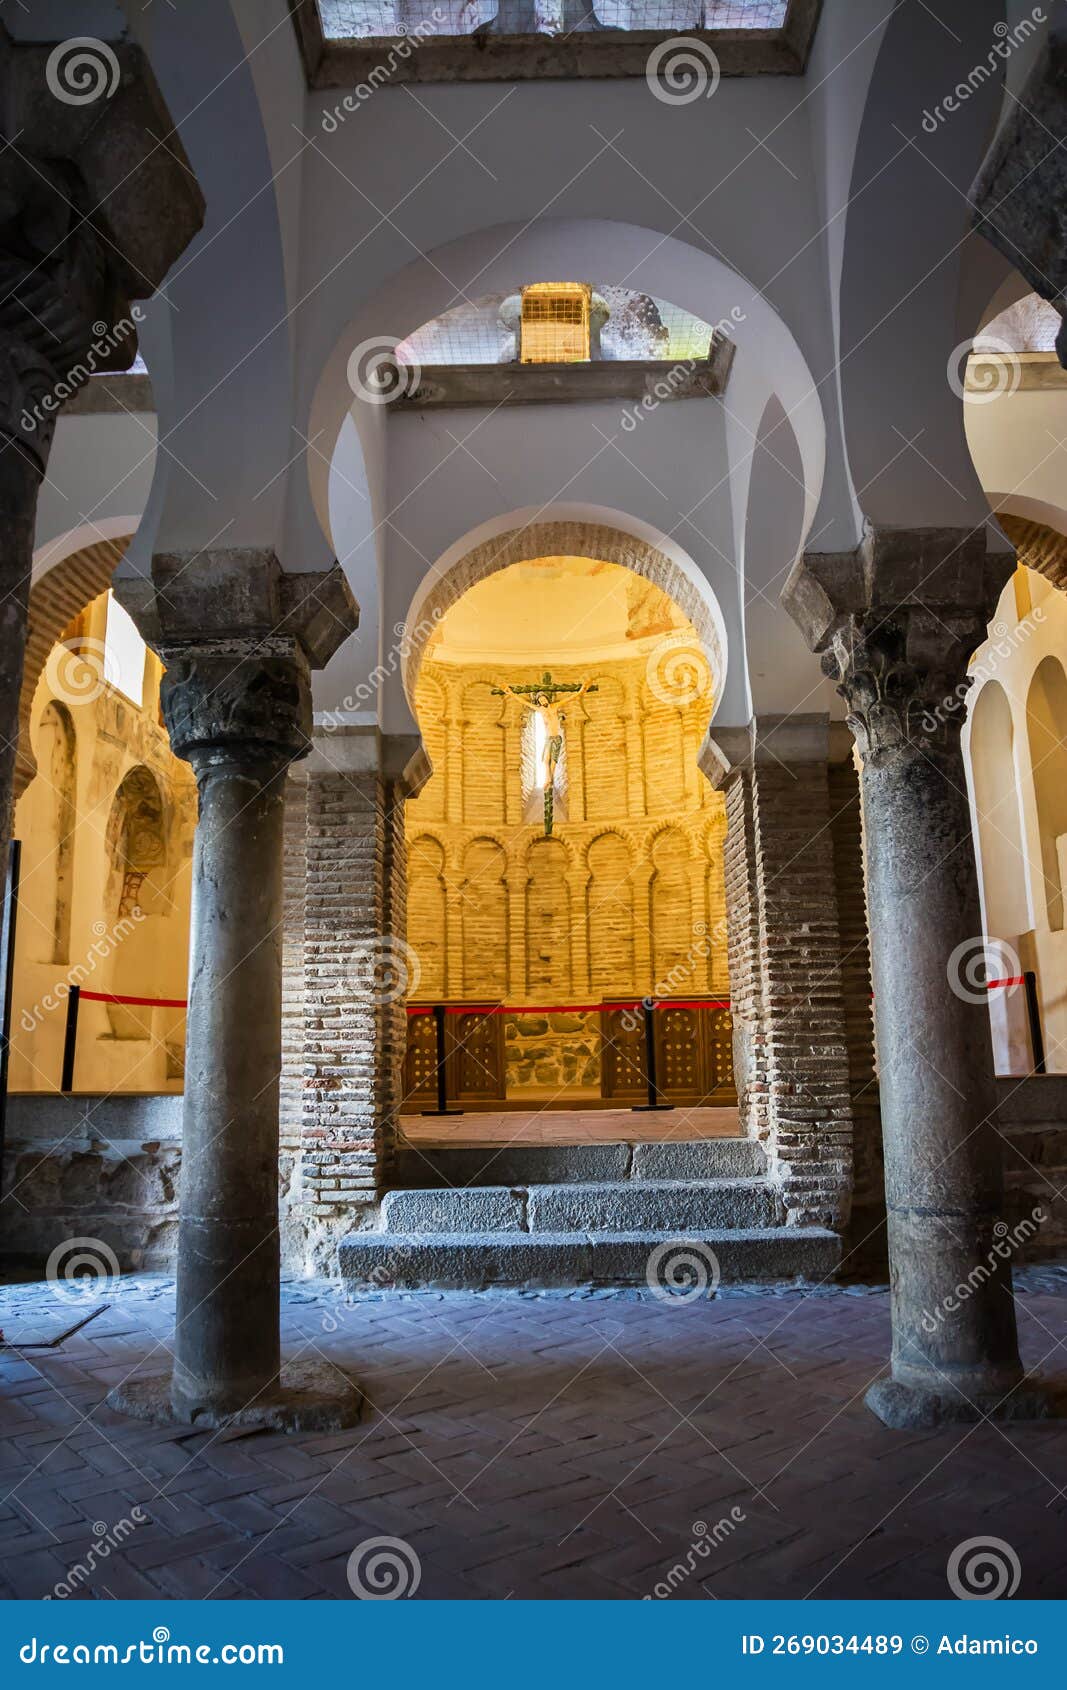 arch and columns and a cross with a christ inside a muslim mosque in toledo